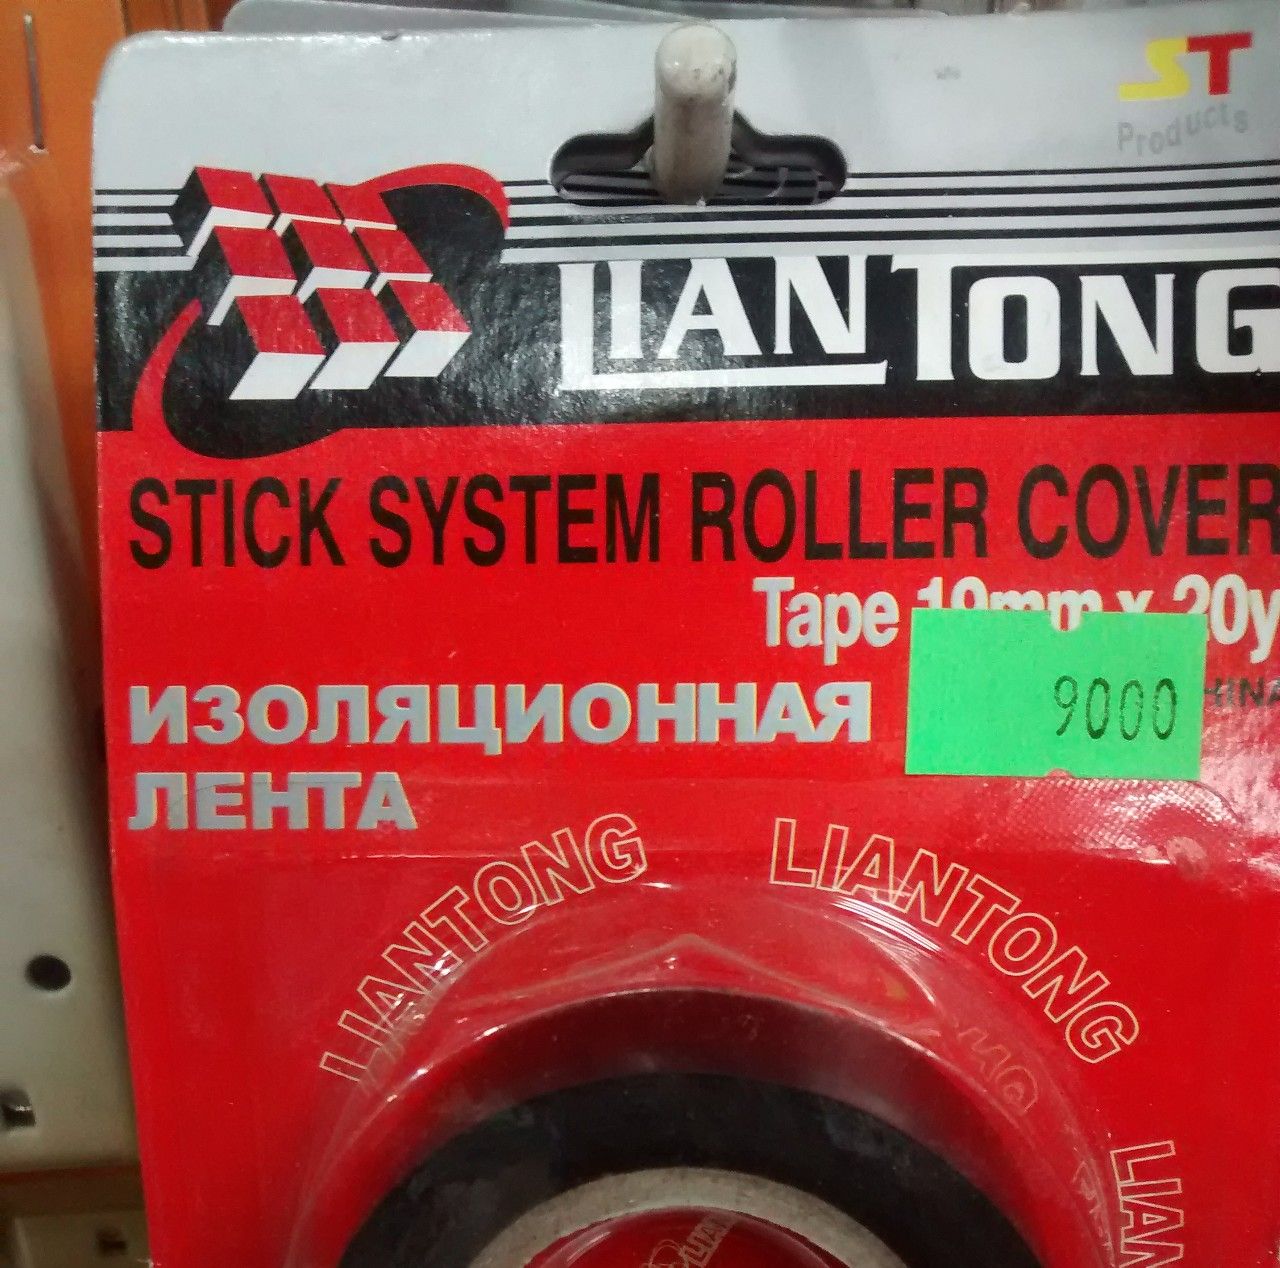 Stick System Roller Cover